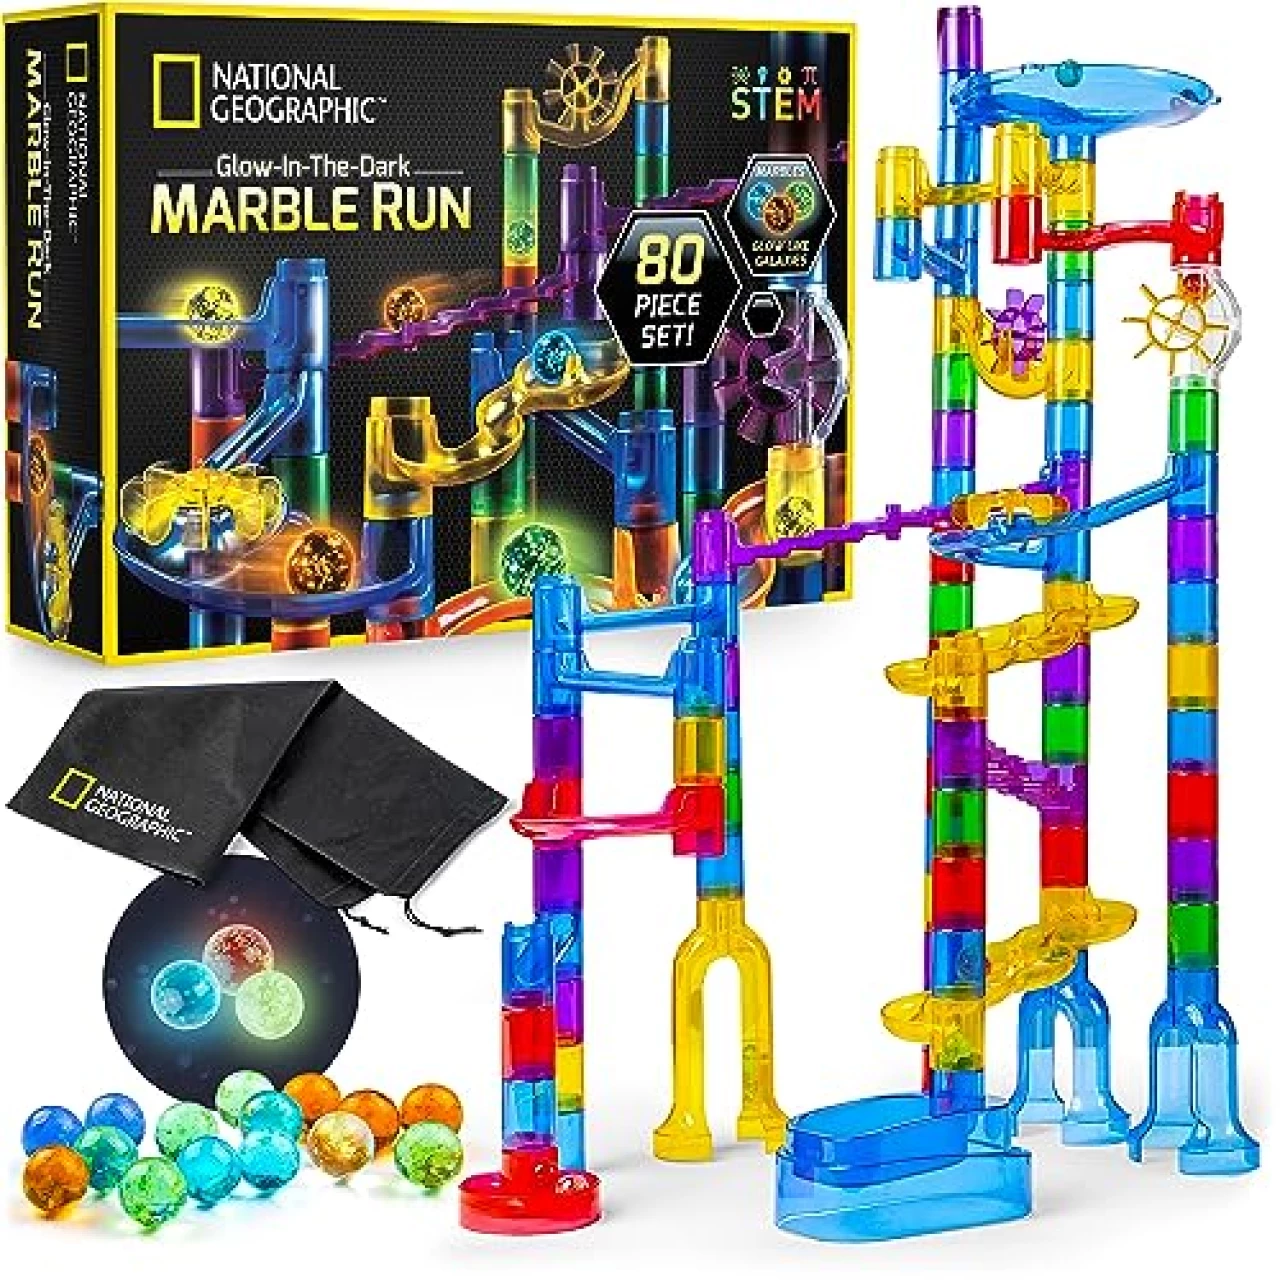 NATIONAL GEOGRAPHIC Glowing Marble Run – 80 Piece Construction Set with 15 Glow in the Dark Glass Marbles &amp; Storage Bag, STEM Gifts for Boys and Girls, Building Project Toy (Amazon Exclusive)